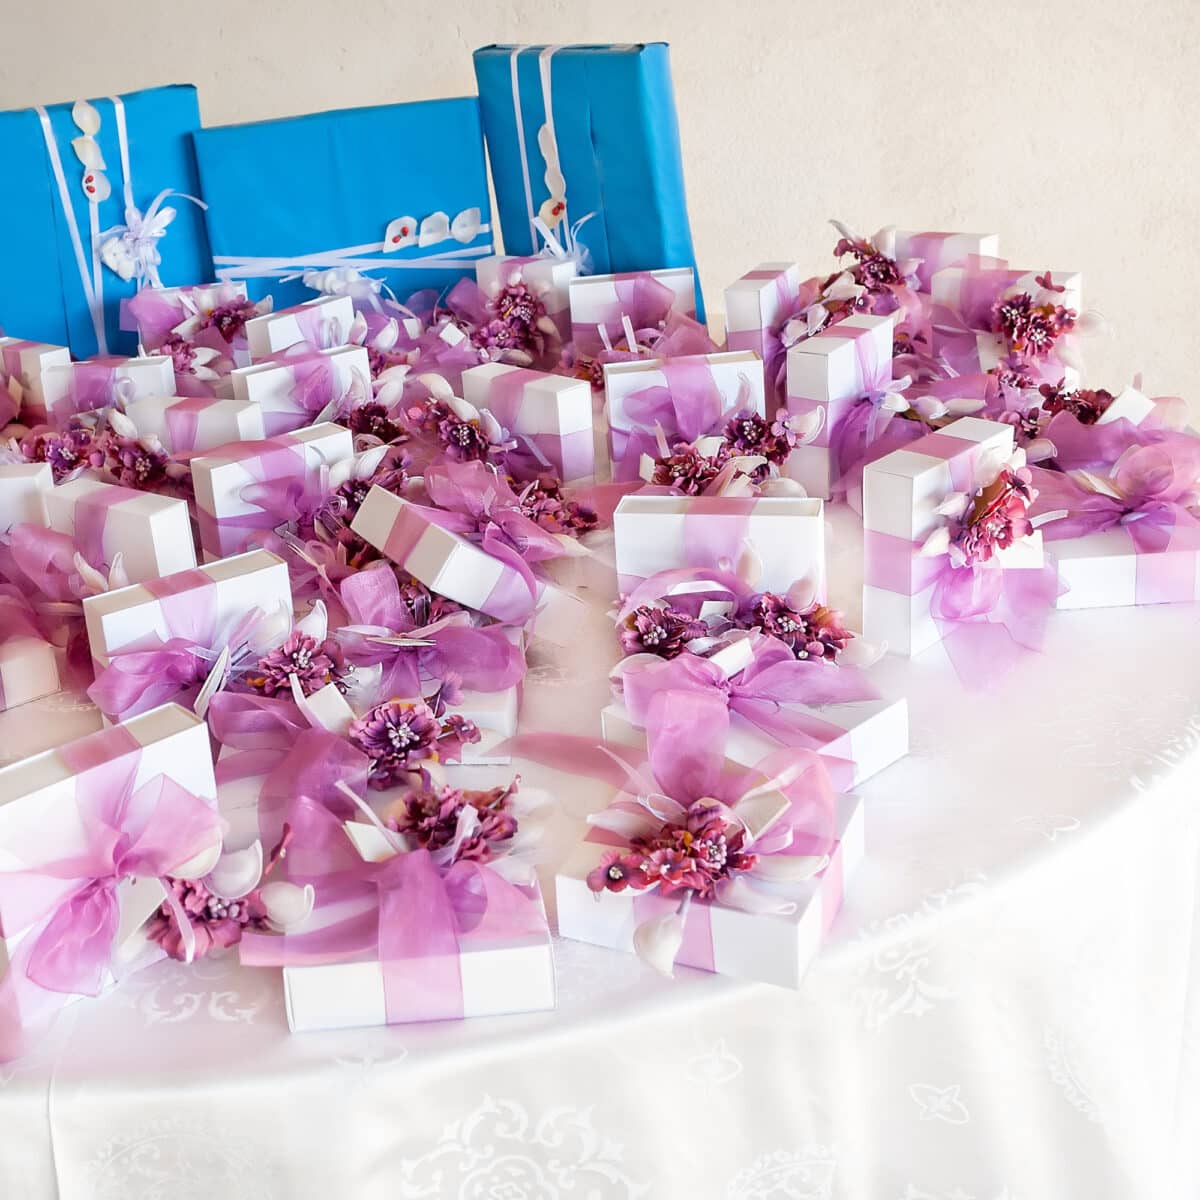 Should wedding favors say thank you?